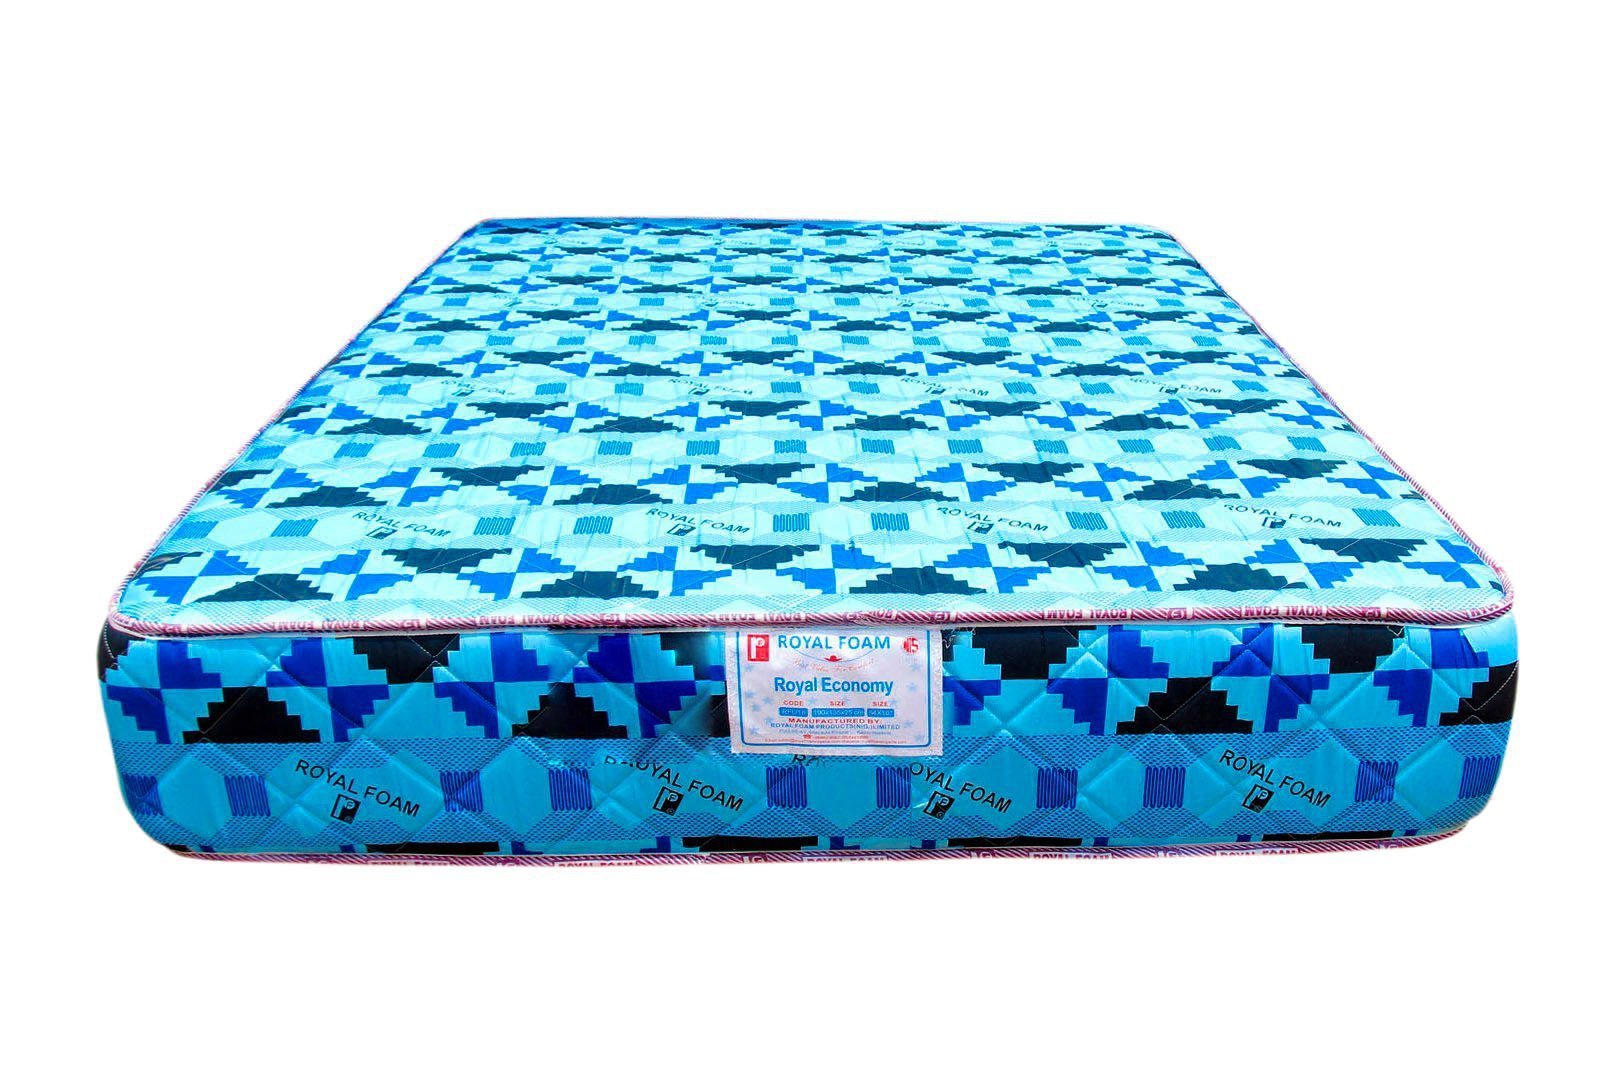 Royal Economy-Poly Cotton Fabric - Fully Quilted Mattress [75 x 54 x 24"] [6ft x 4.4ft x 24inches](Lagos Only)